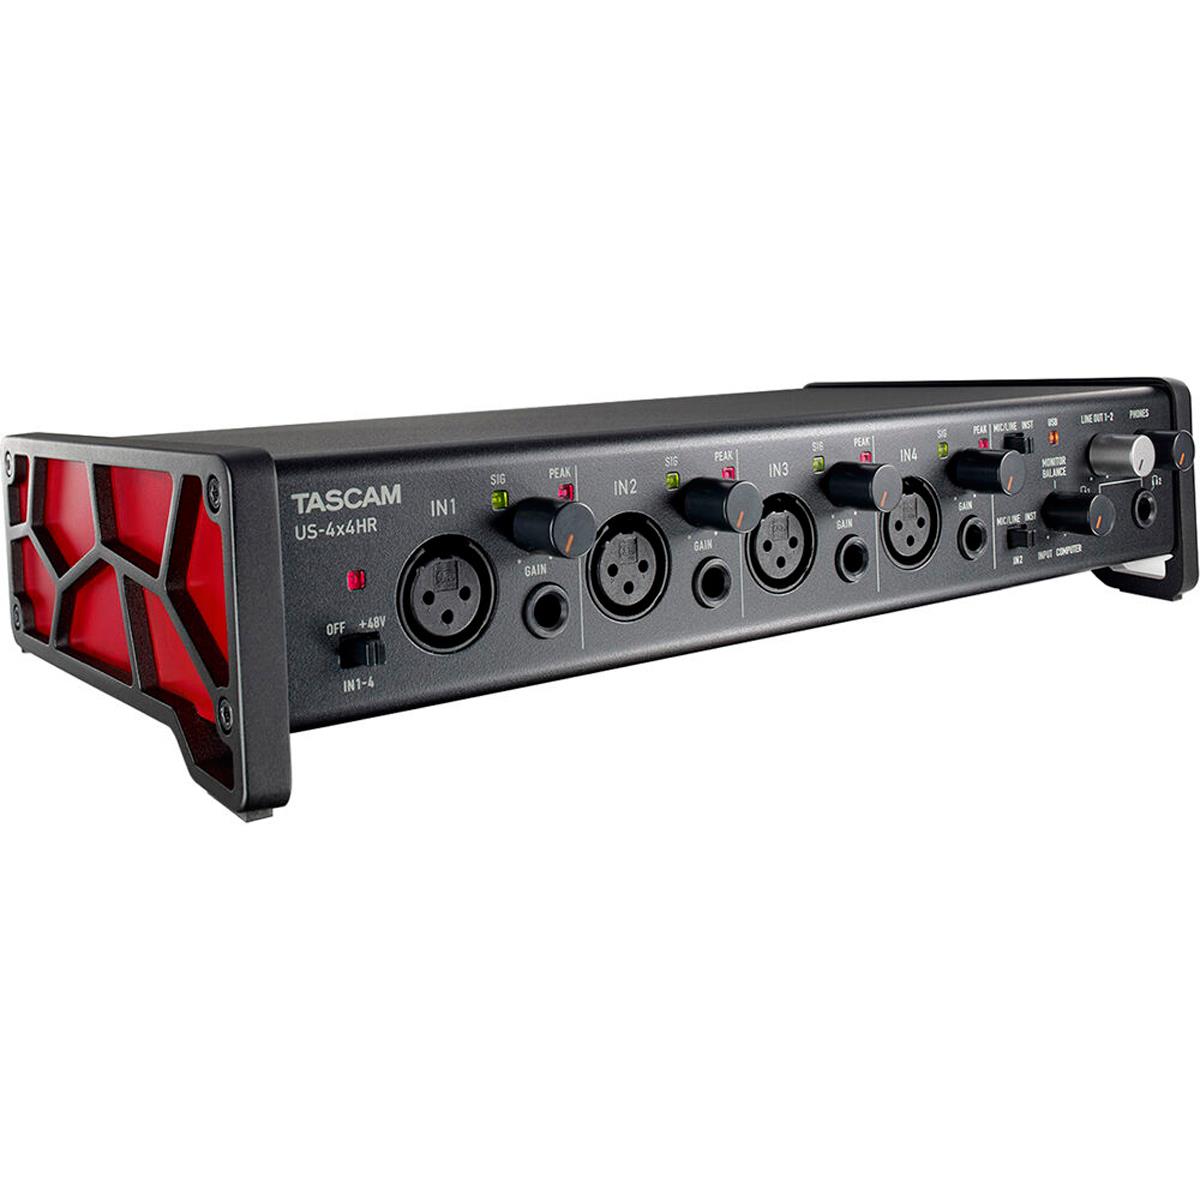 

Tascam US-4x4HR 4Mic, 4In/4Out High Resolution Versatile USB Audio Interface